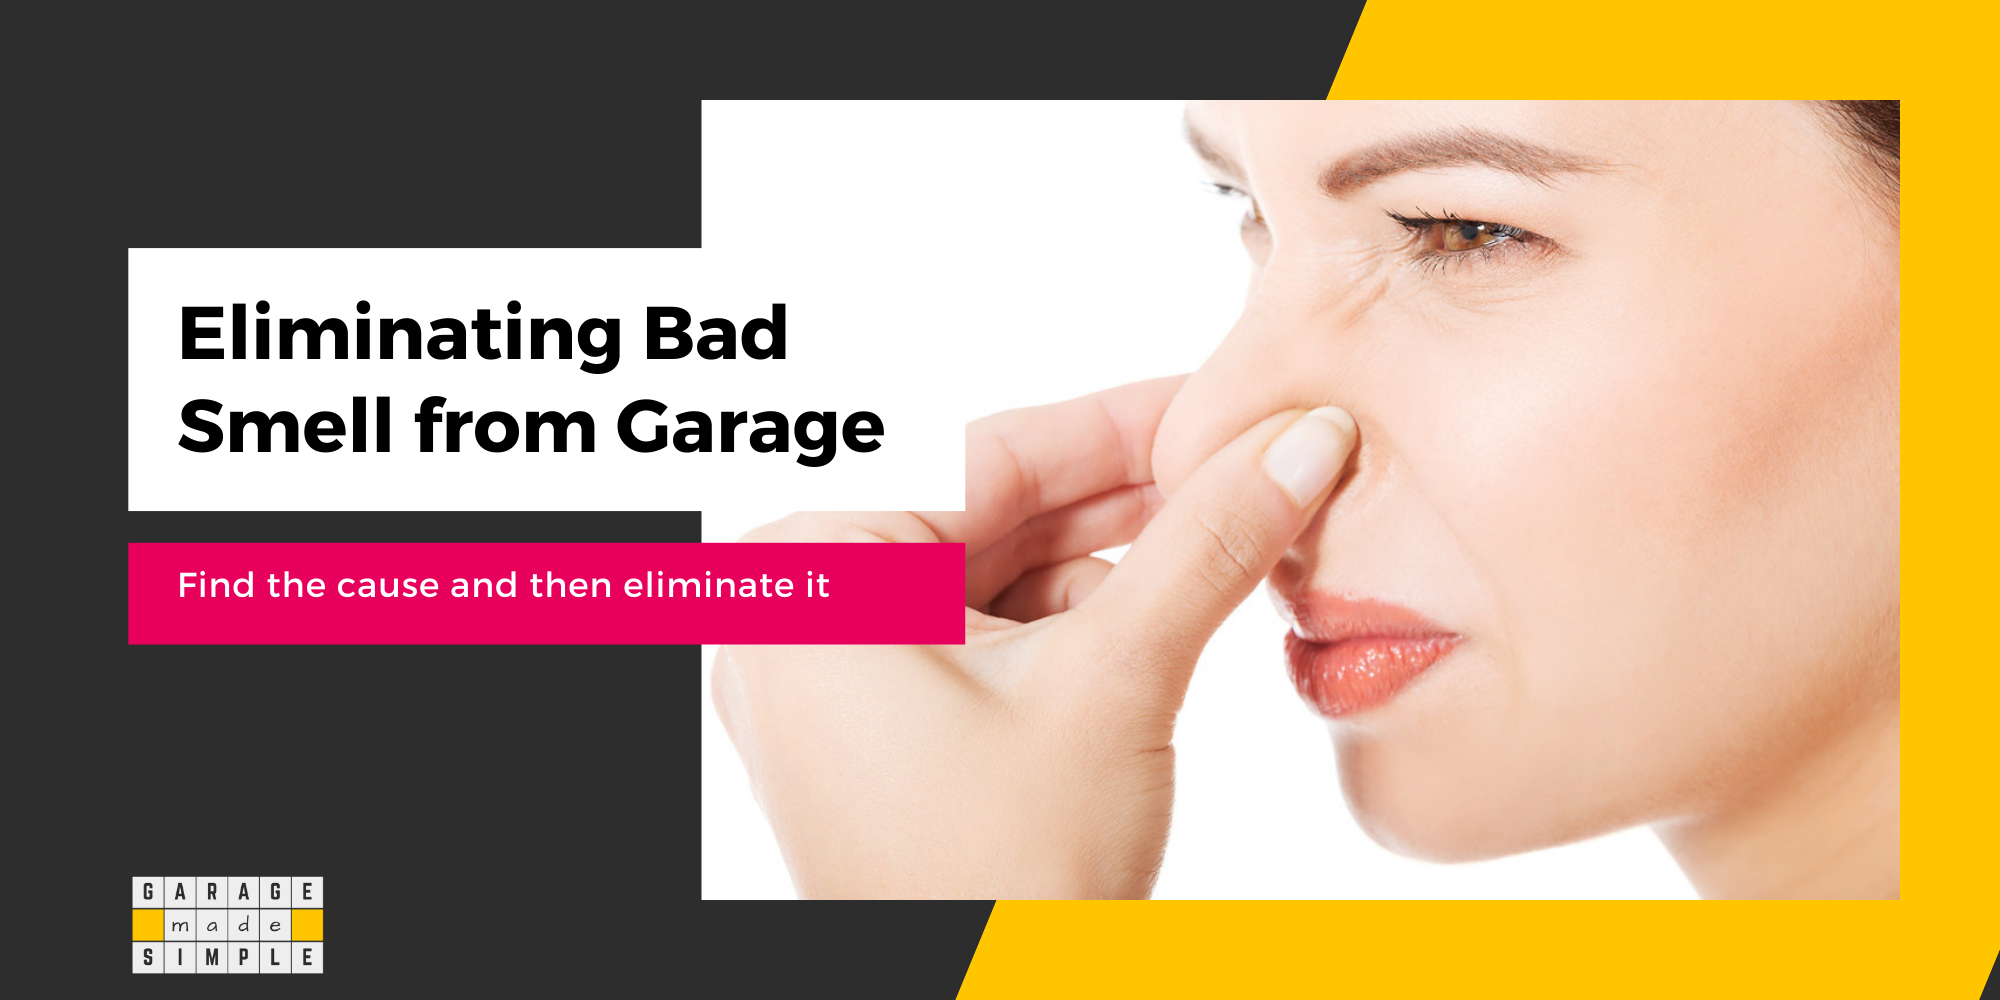 How To Make Your Garage Smell Fresh As New? (8+1 Top Tips!)